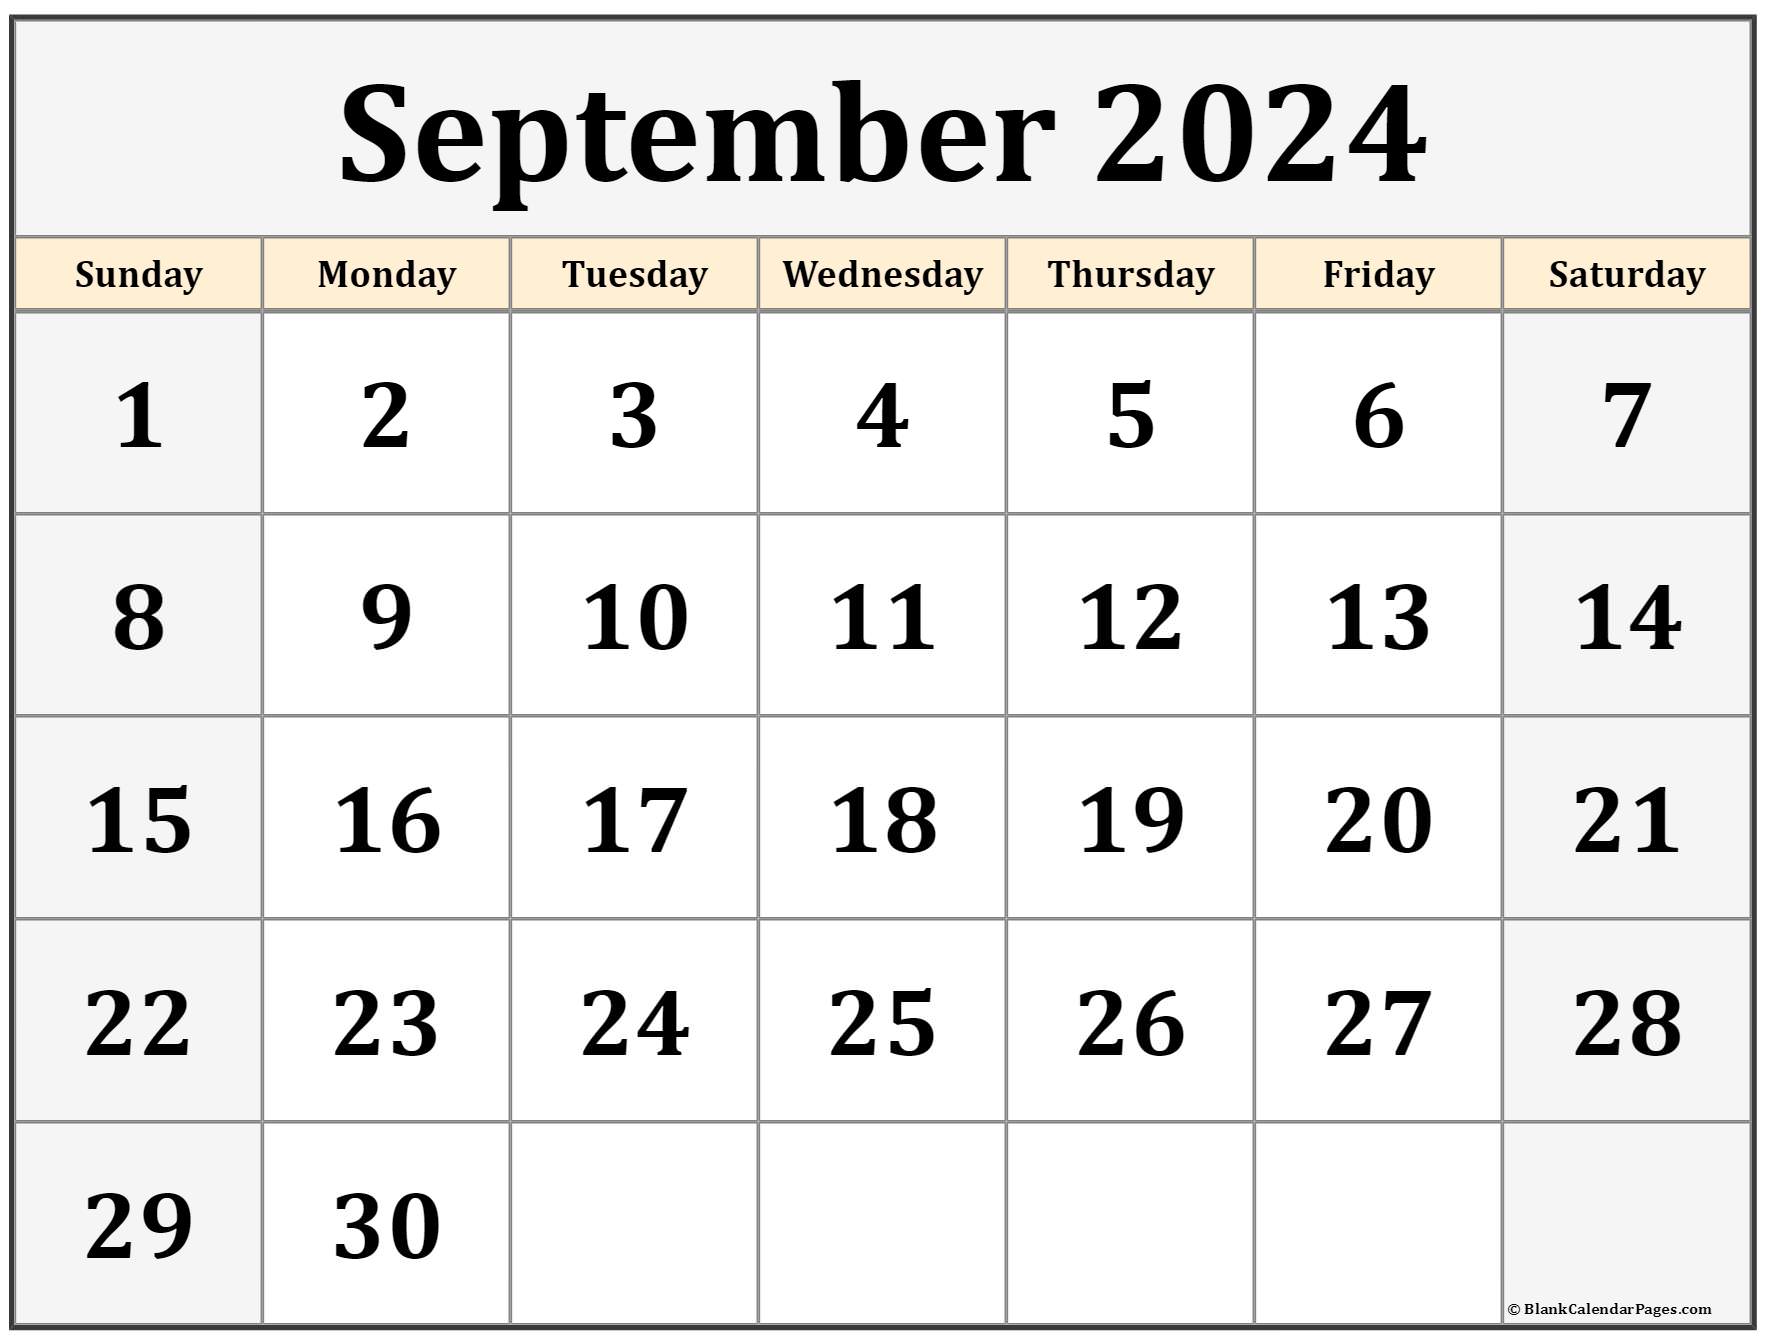 How Many Days Are In September 2024 gayel gilligan